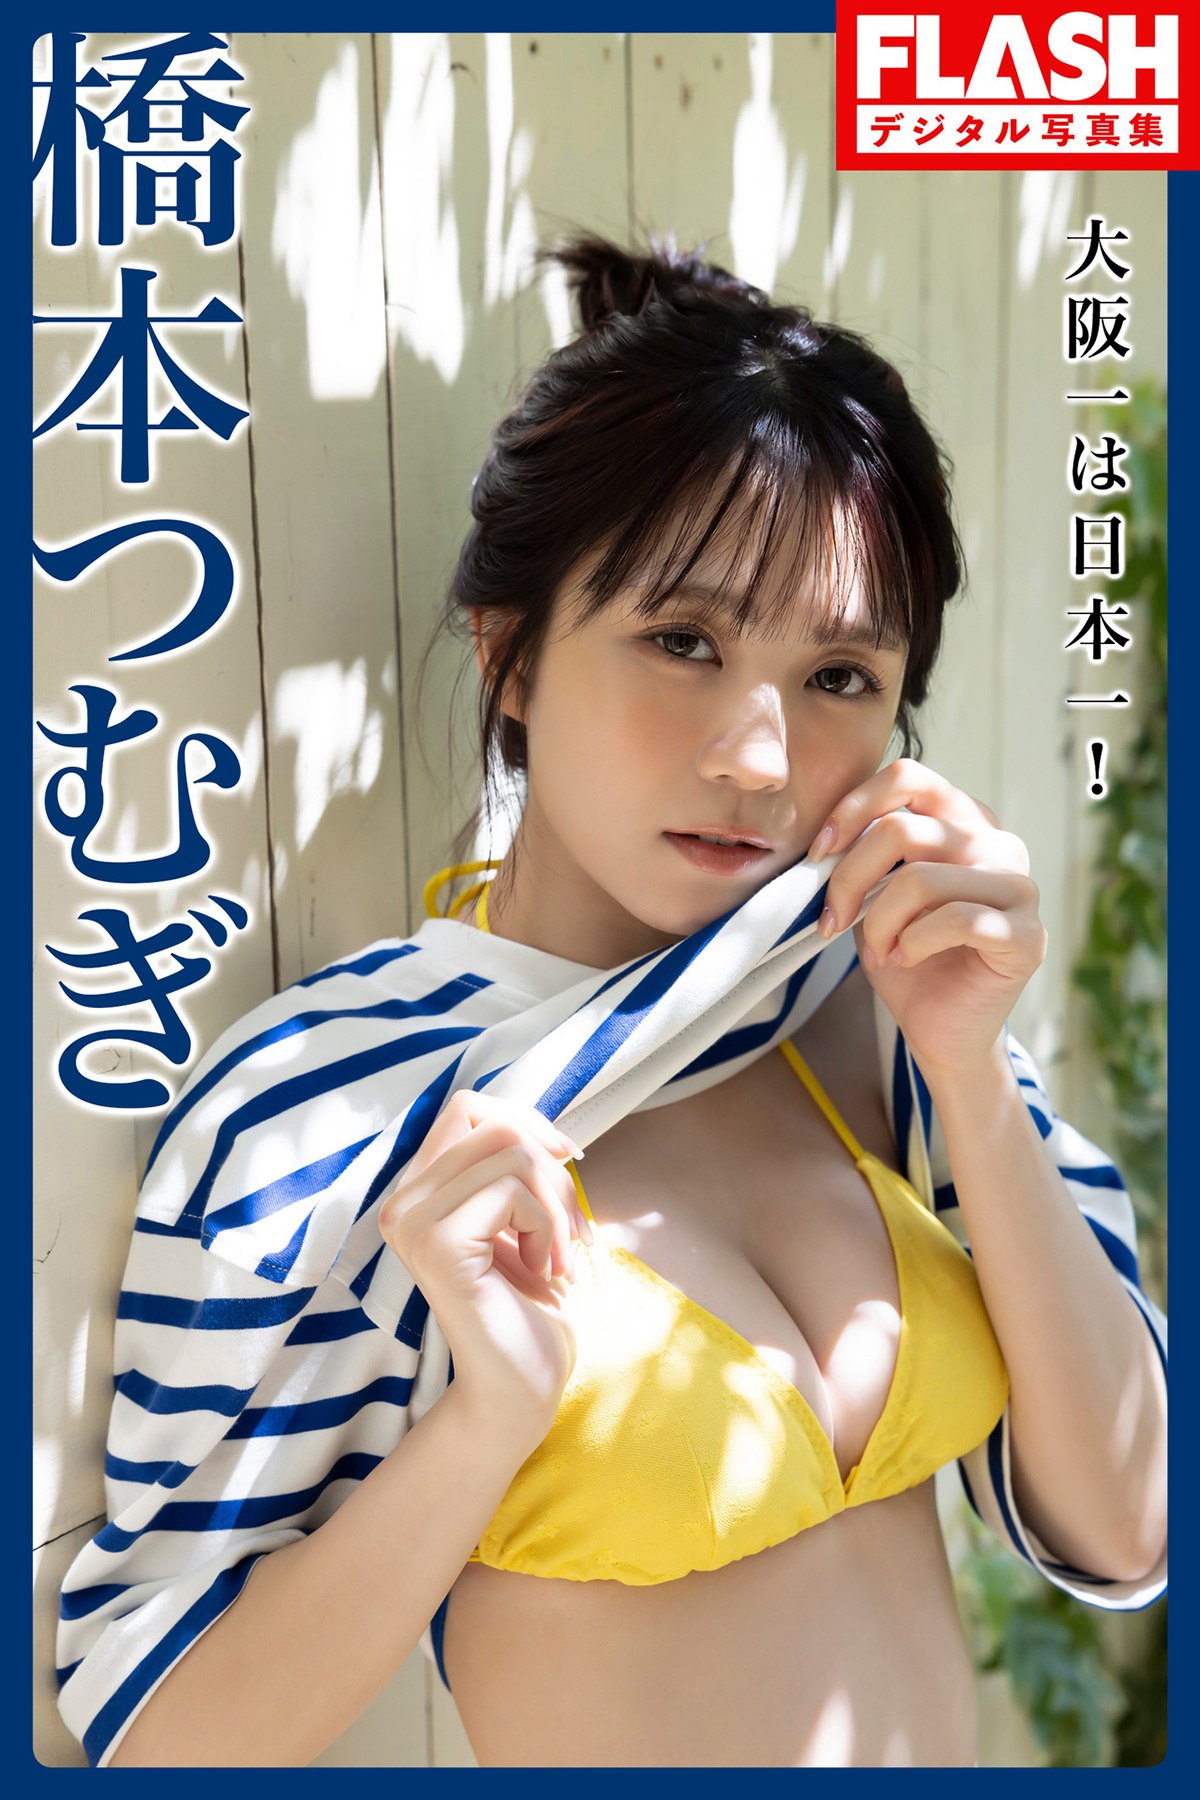 FLASH Photobook 2023-06-20 Tsumugi Hashimoto 橋本つむぎ – The Best In Osaka Is The Best In Japan